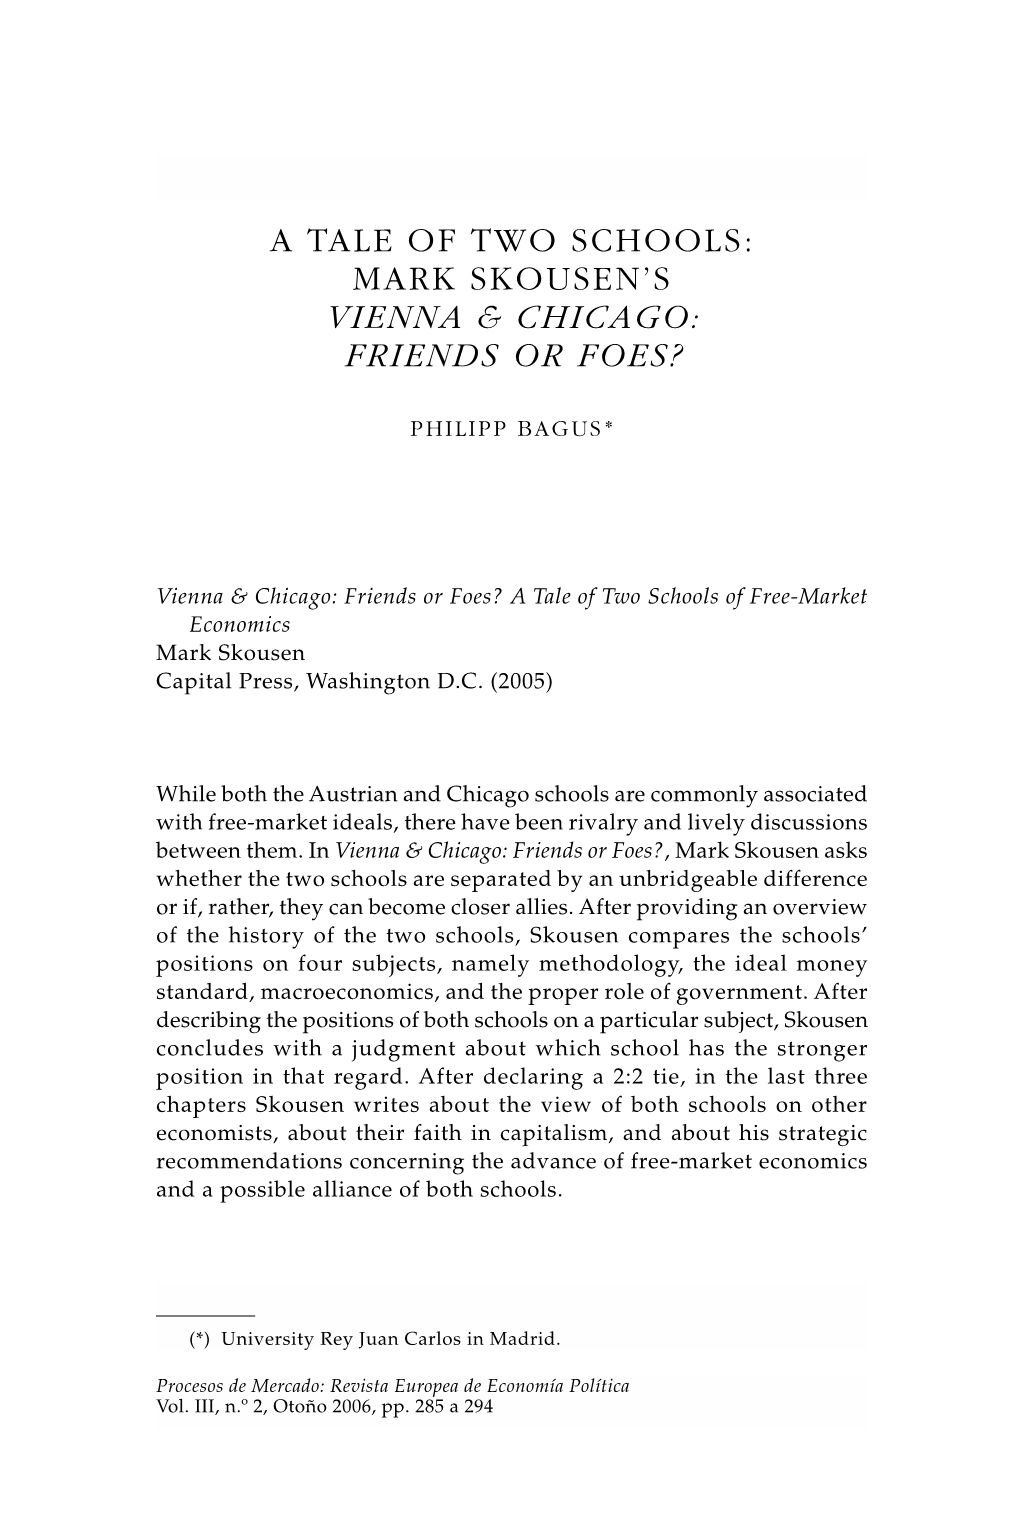 A Tale of Two Schools: Mark Skousen's Vienna & Chicago: Friends Or